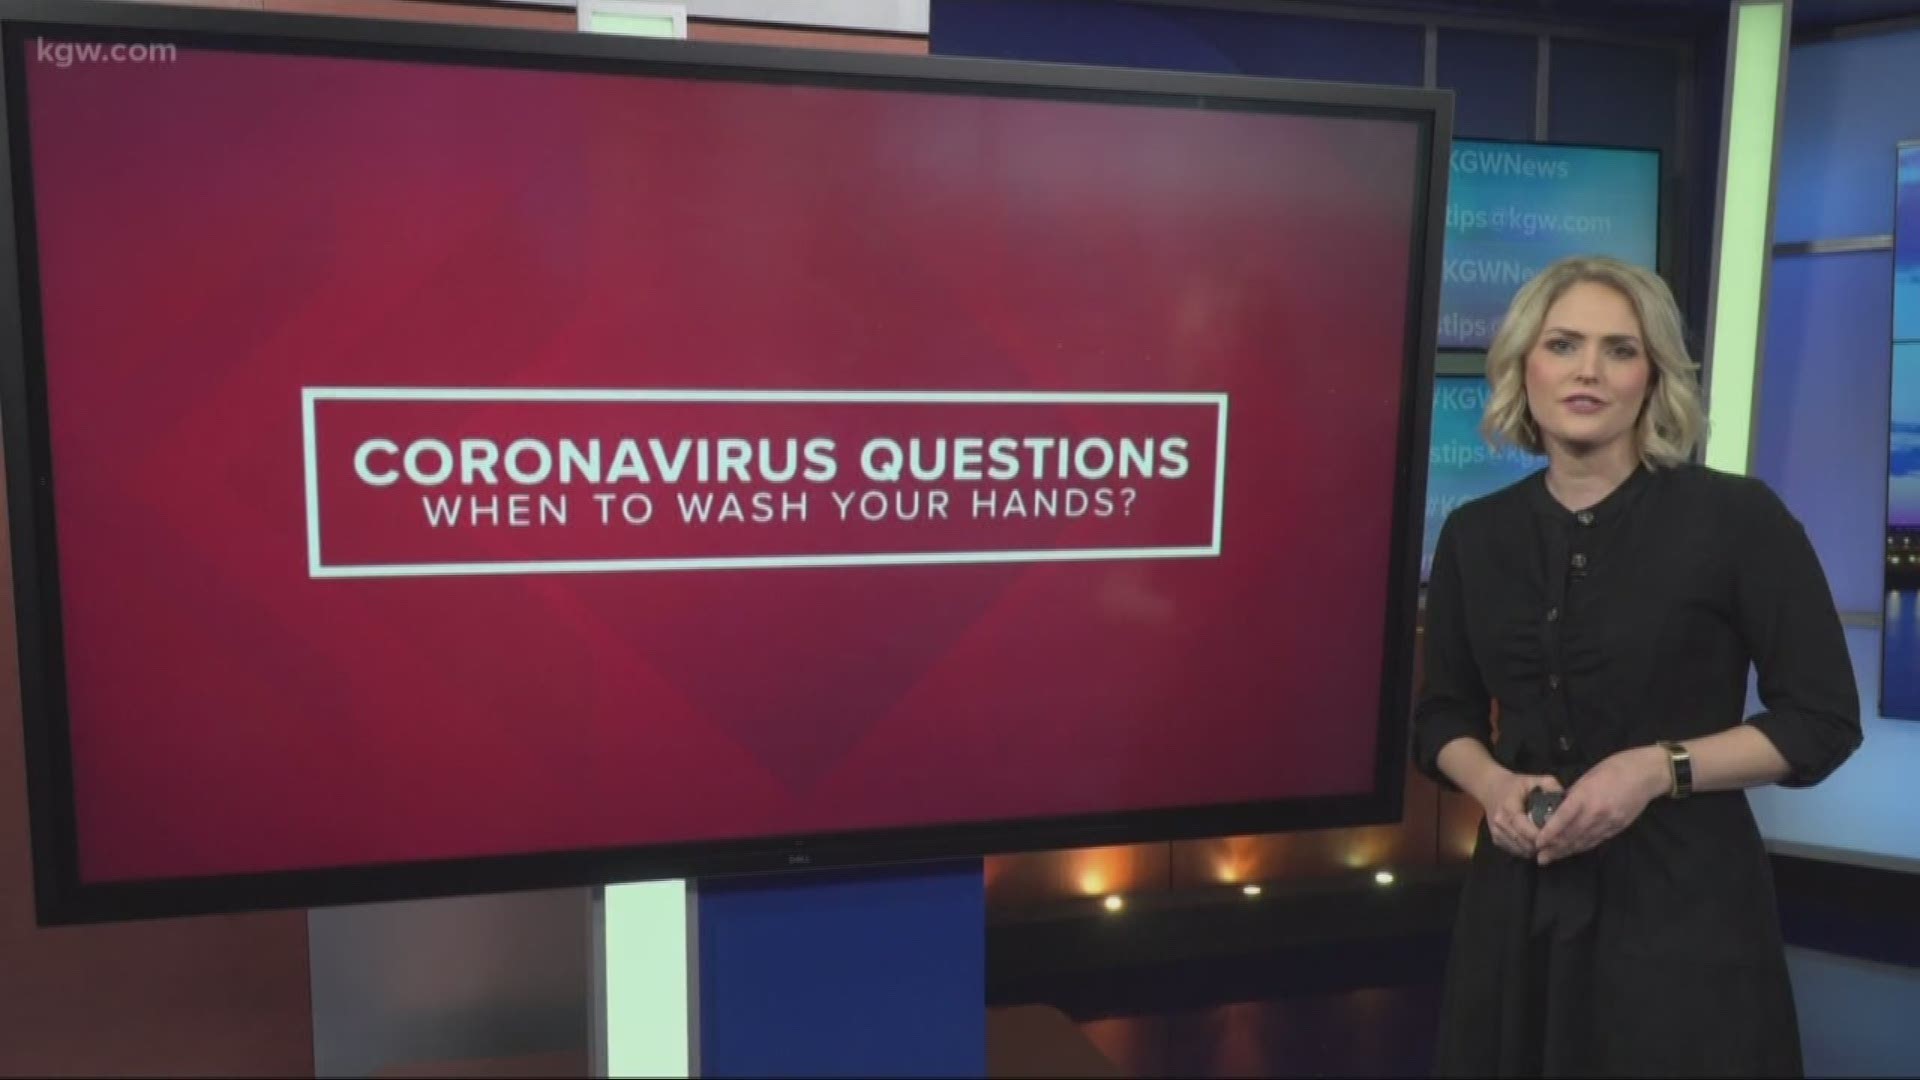 Where do I get tested if I feel sick? When should I wash my hands? We answer coronavirus questions you texted to us.